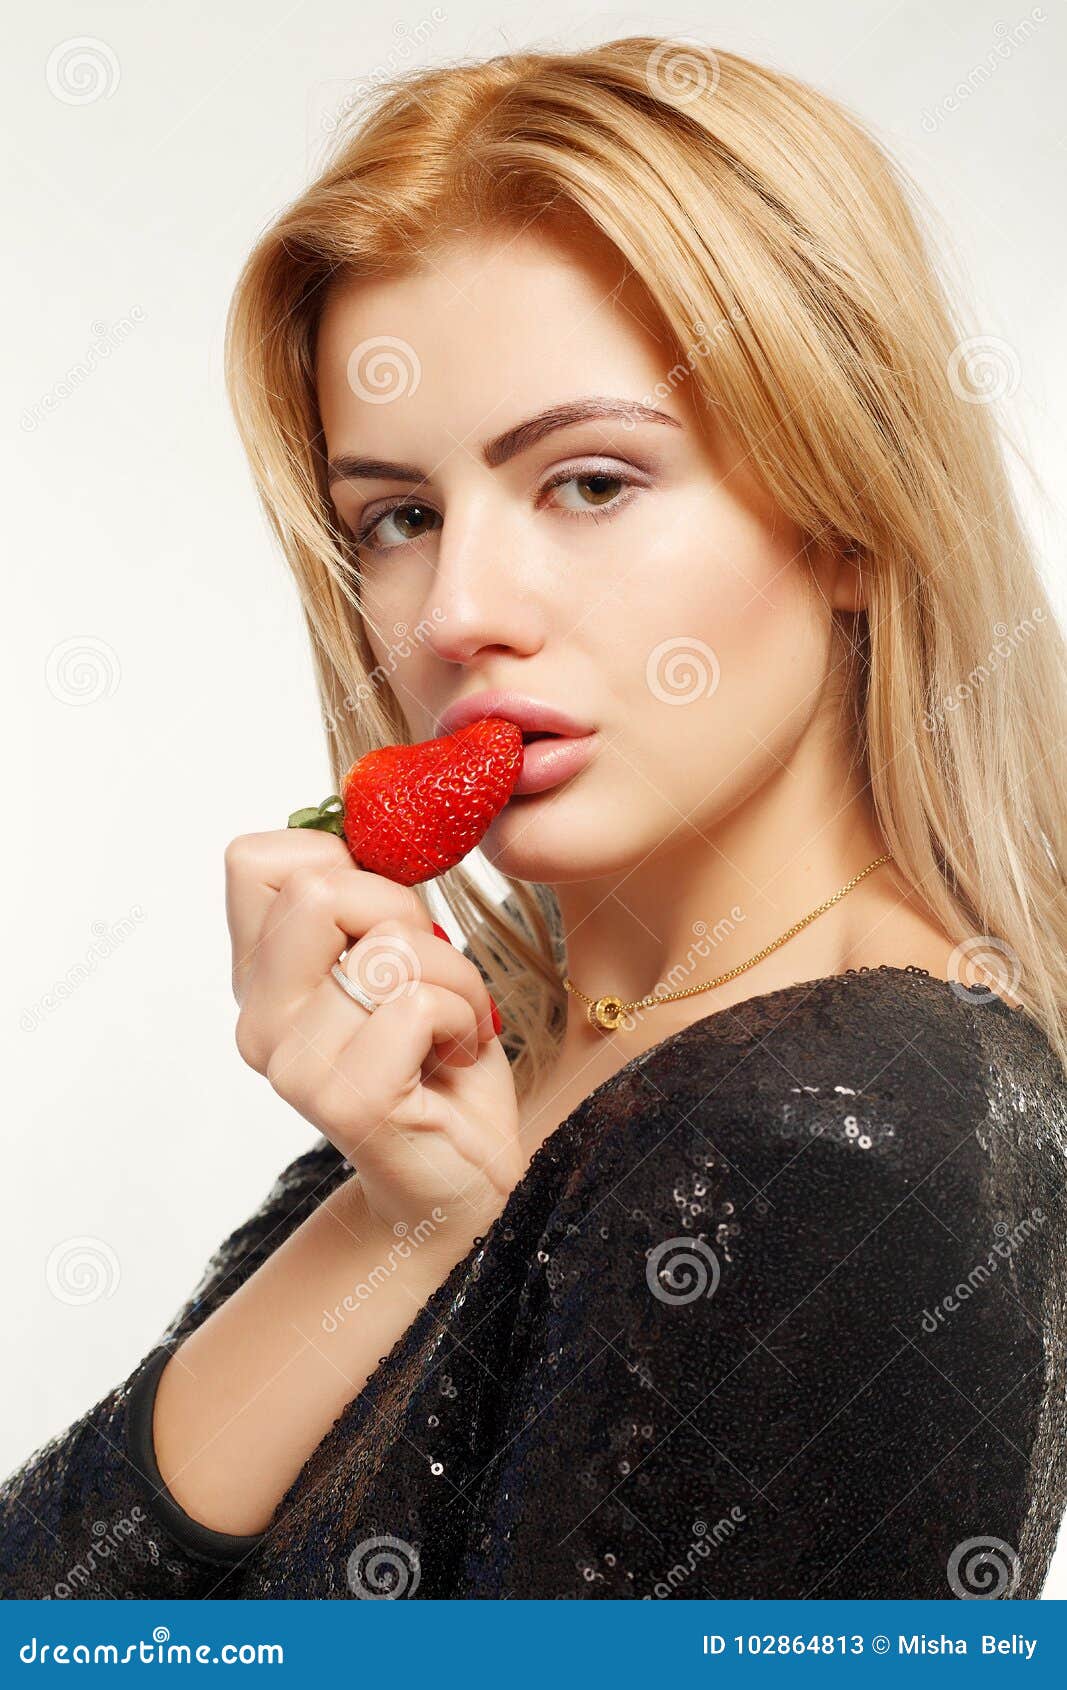 Blonde With Strawberries Stock Image Image Of Harvest 102864813 